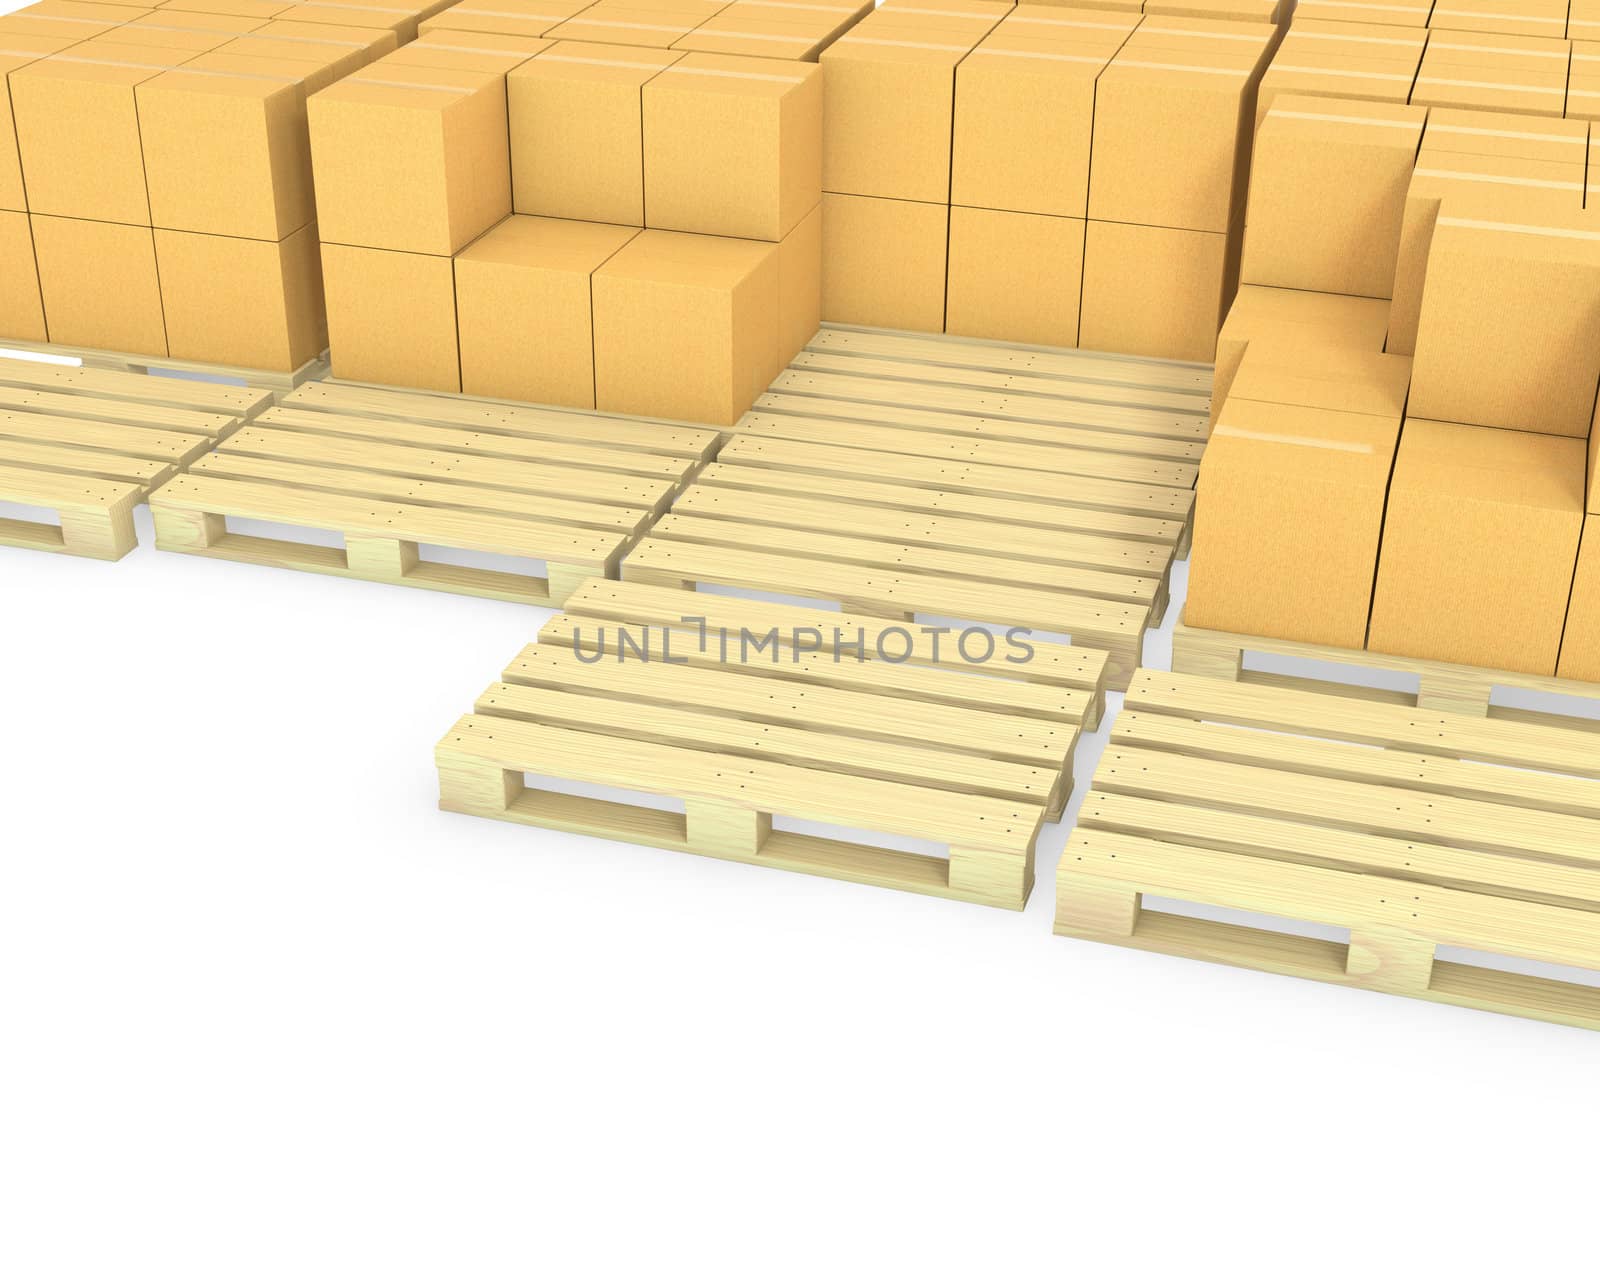 Stacks of cardboard boxes on a pallets isolated on white background